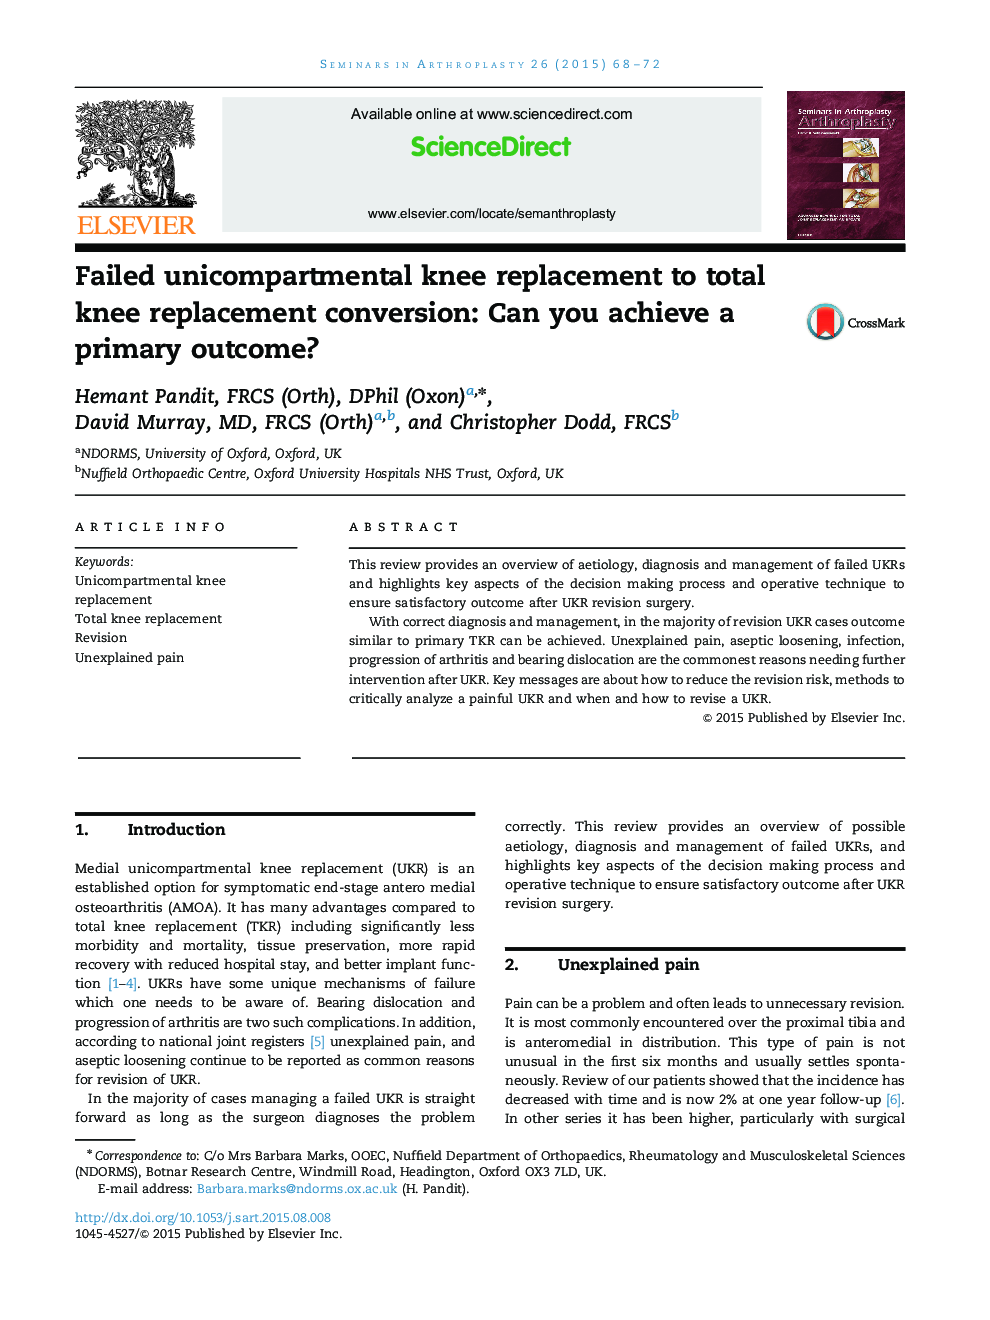 Failed unicompartmental knee replacement to total knee replacement conversion: Can you achieve a primary outcome?